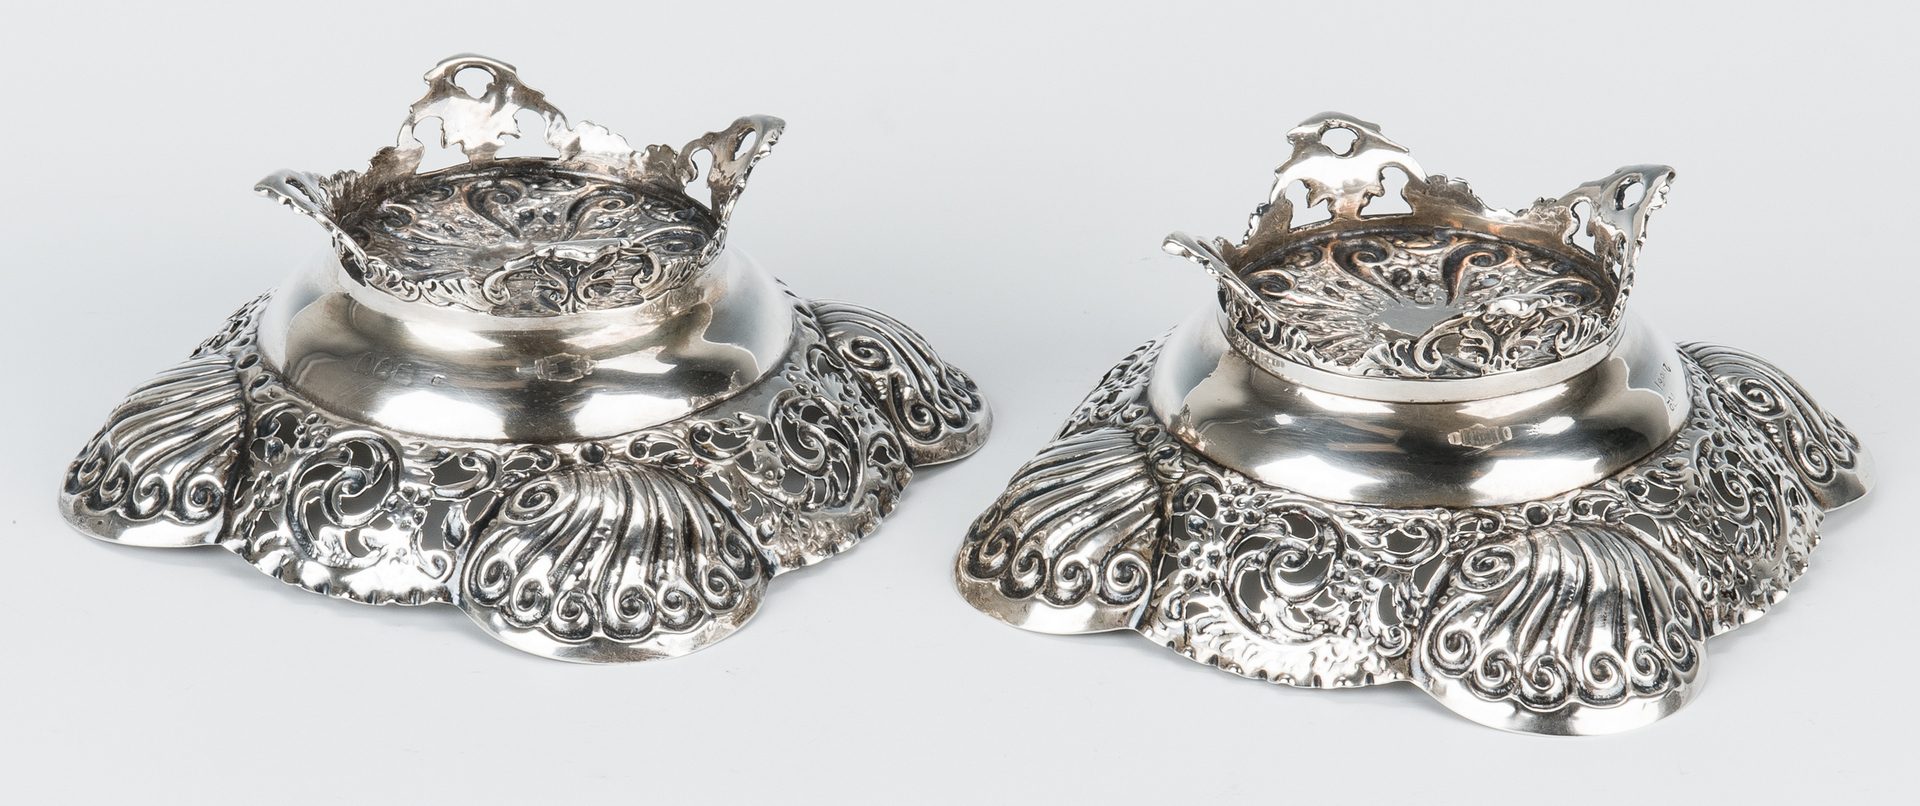 Lot 200: 3 Art Nouveau Period English Sterling Table Items